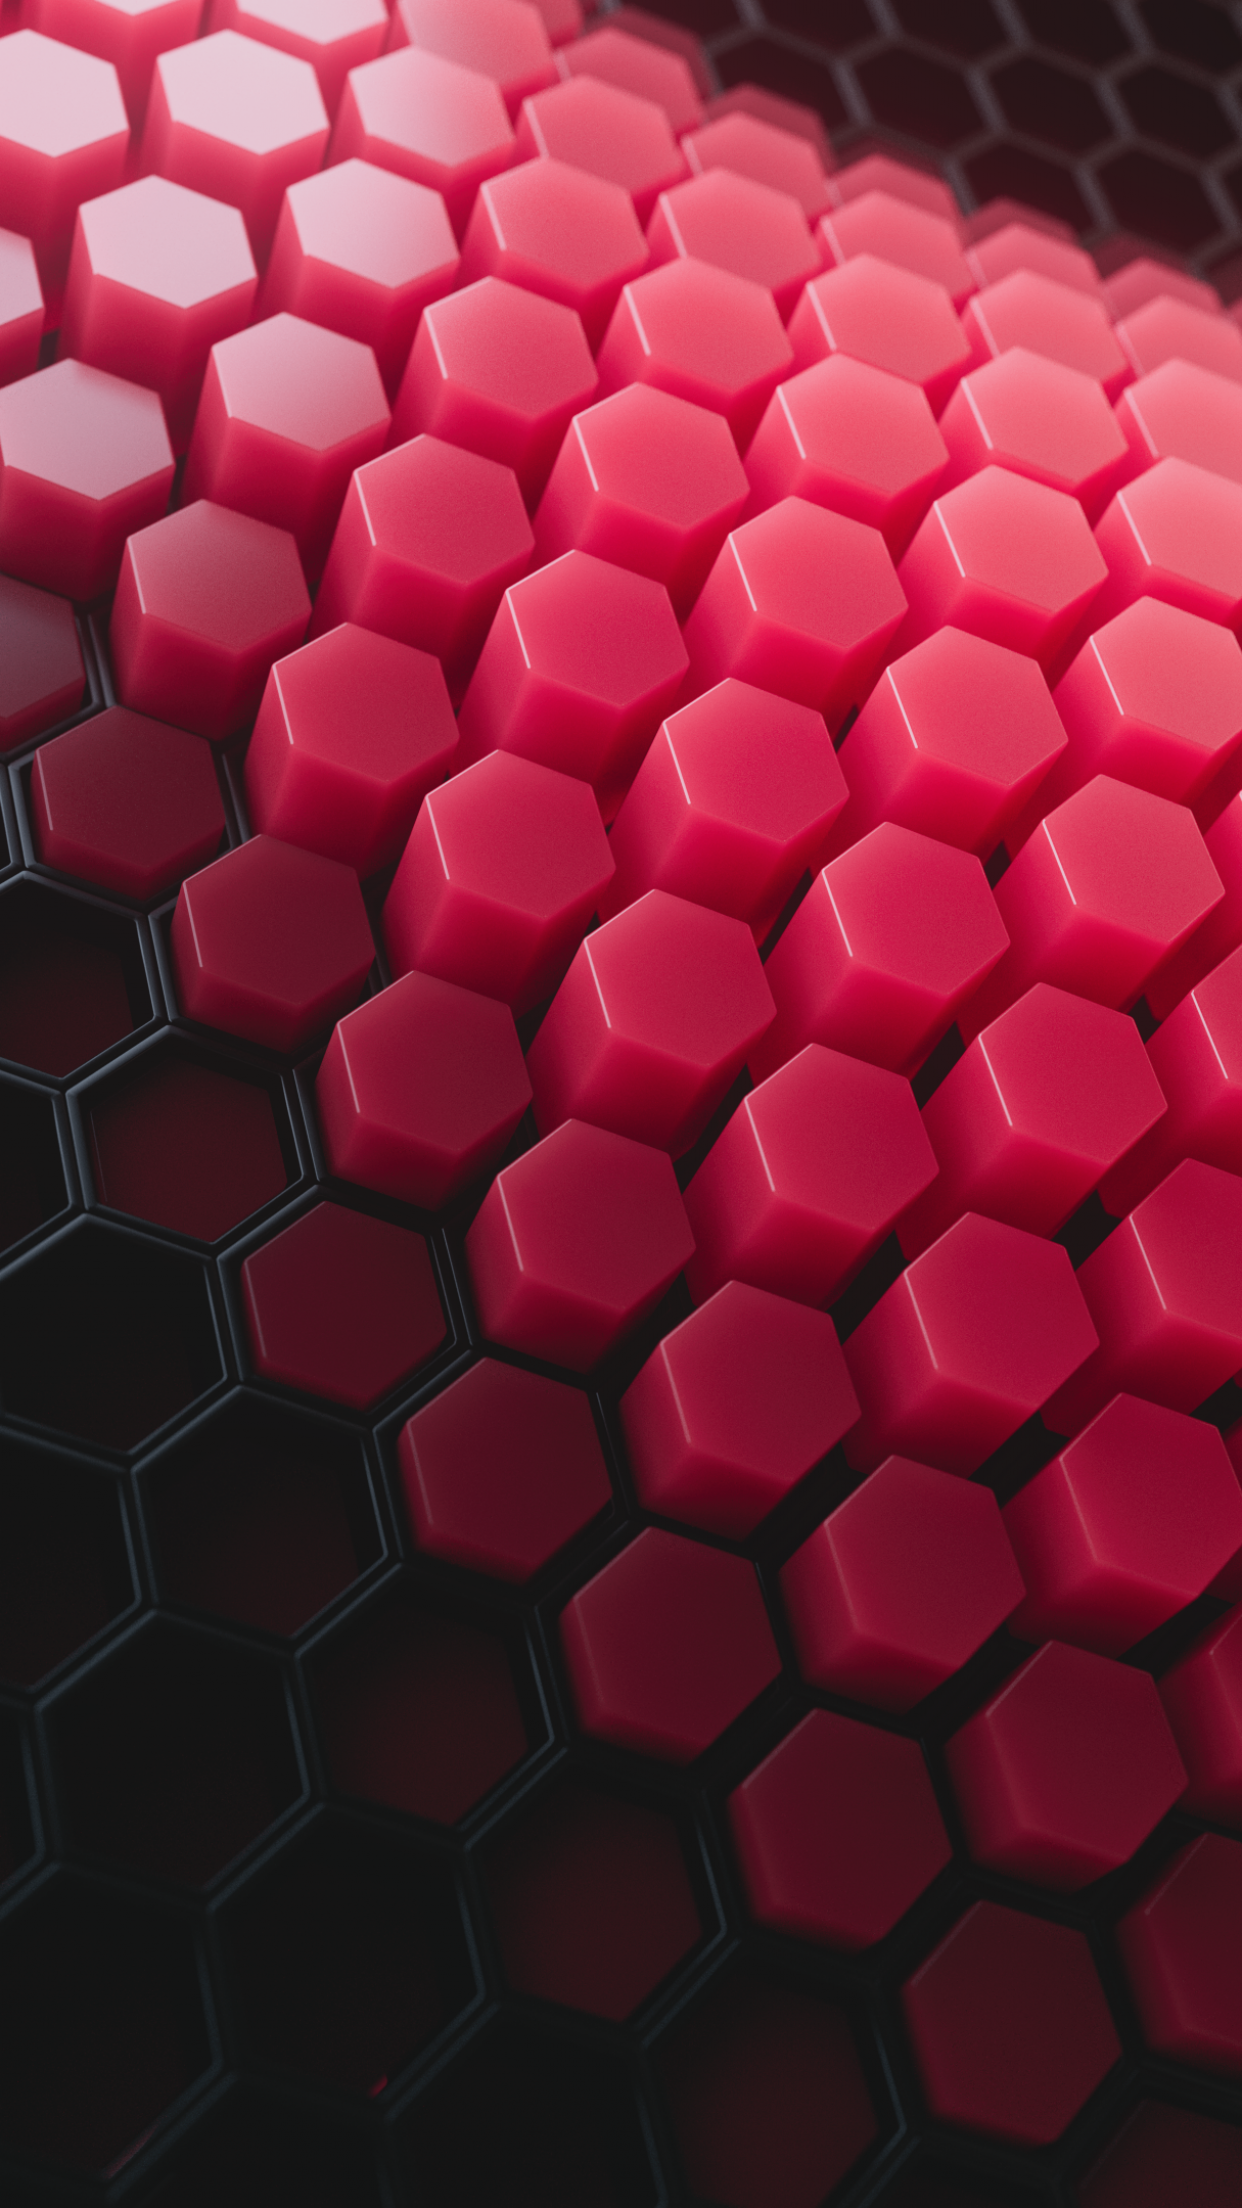 Hexagons Wallpaper 4K, Patterns, Red background, Red blocks, Abstract